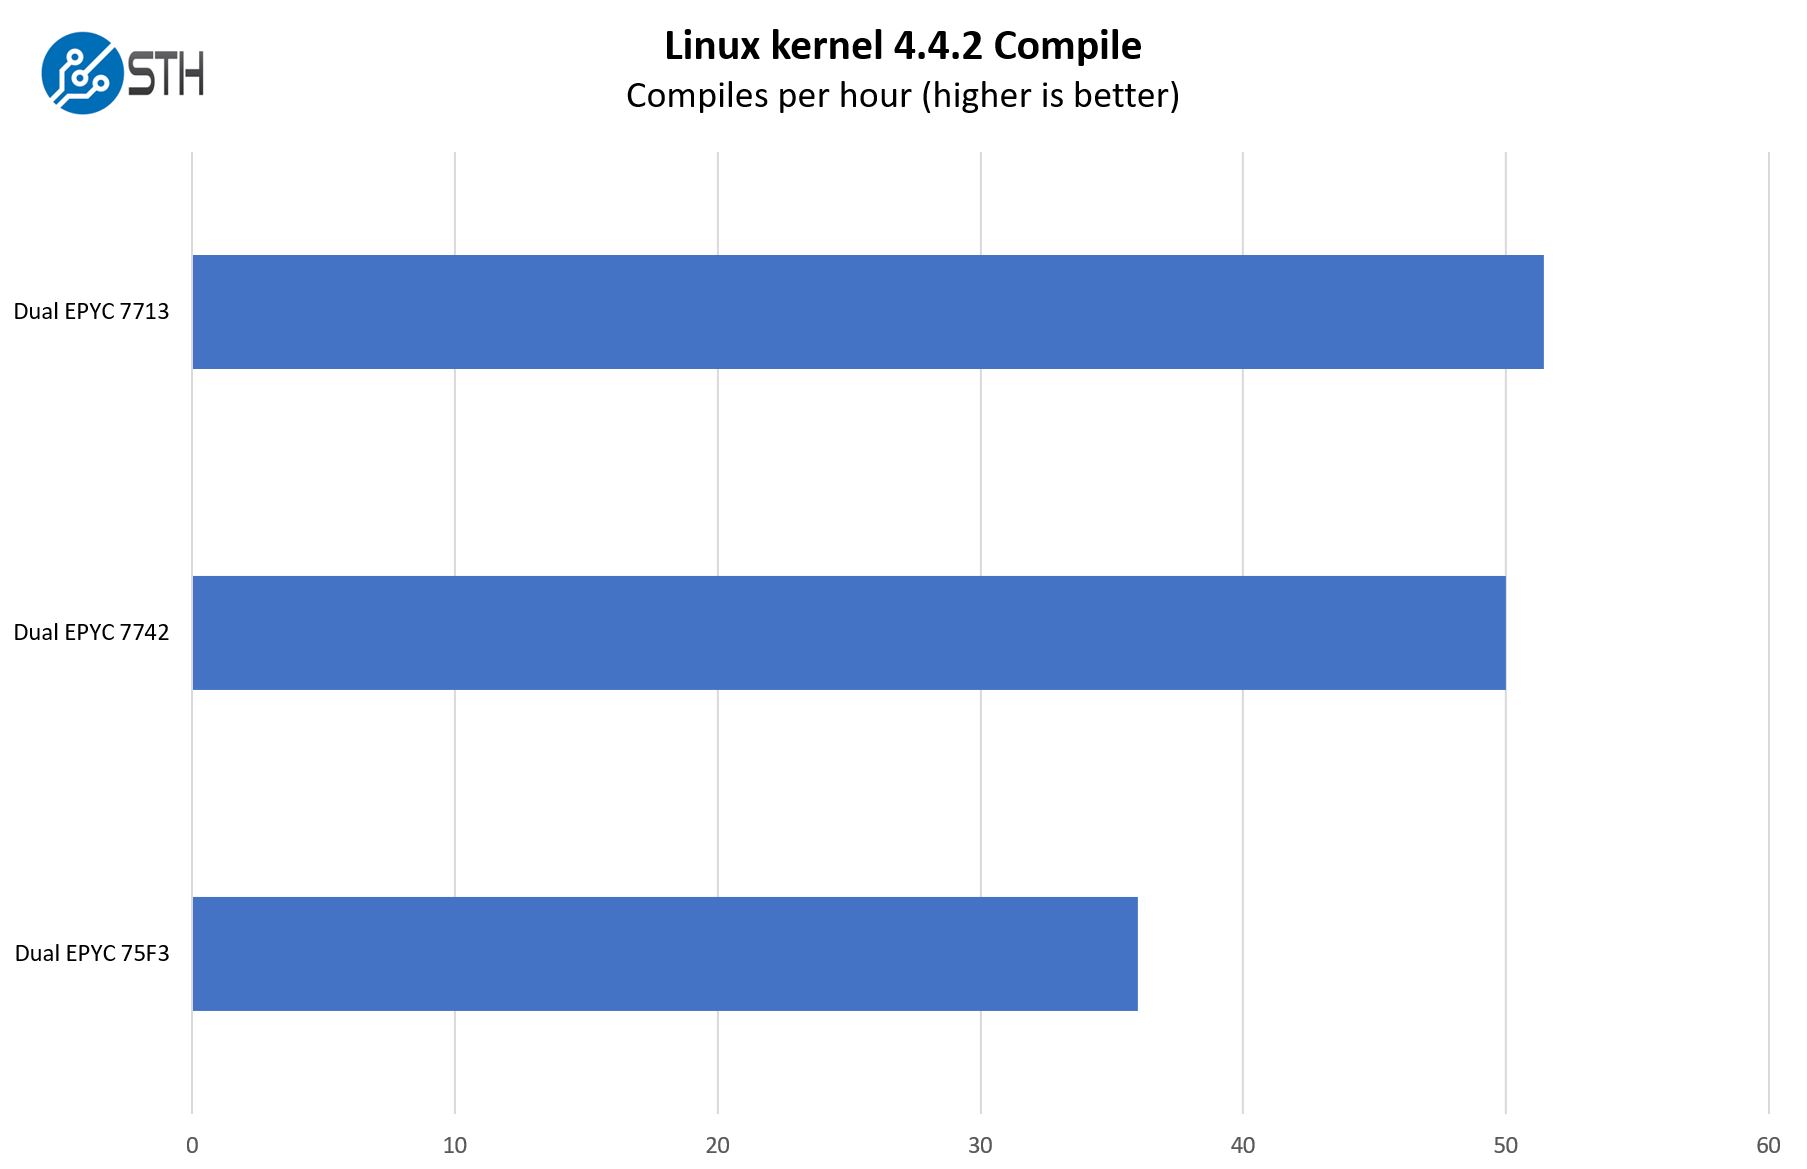 Supermicro AS 1024US TRT Linux Kernel Compile Benchmark